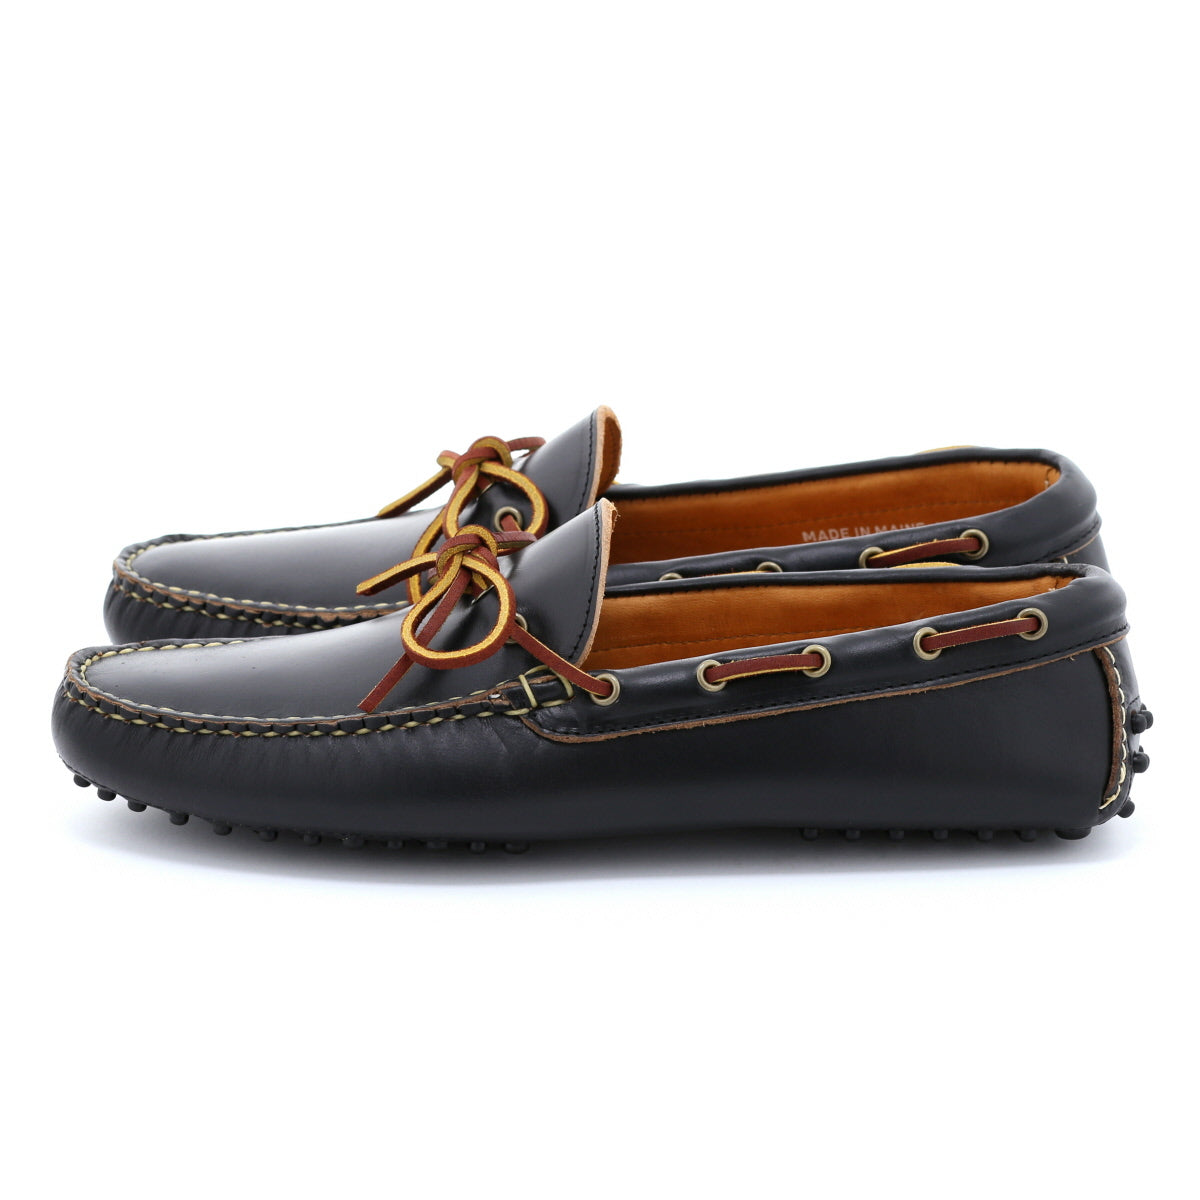 Westbrook Driving-moc - Black Chromexcel | Rancourt & Men's Boots and